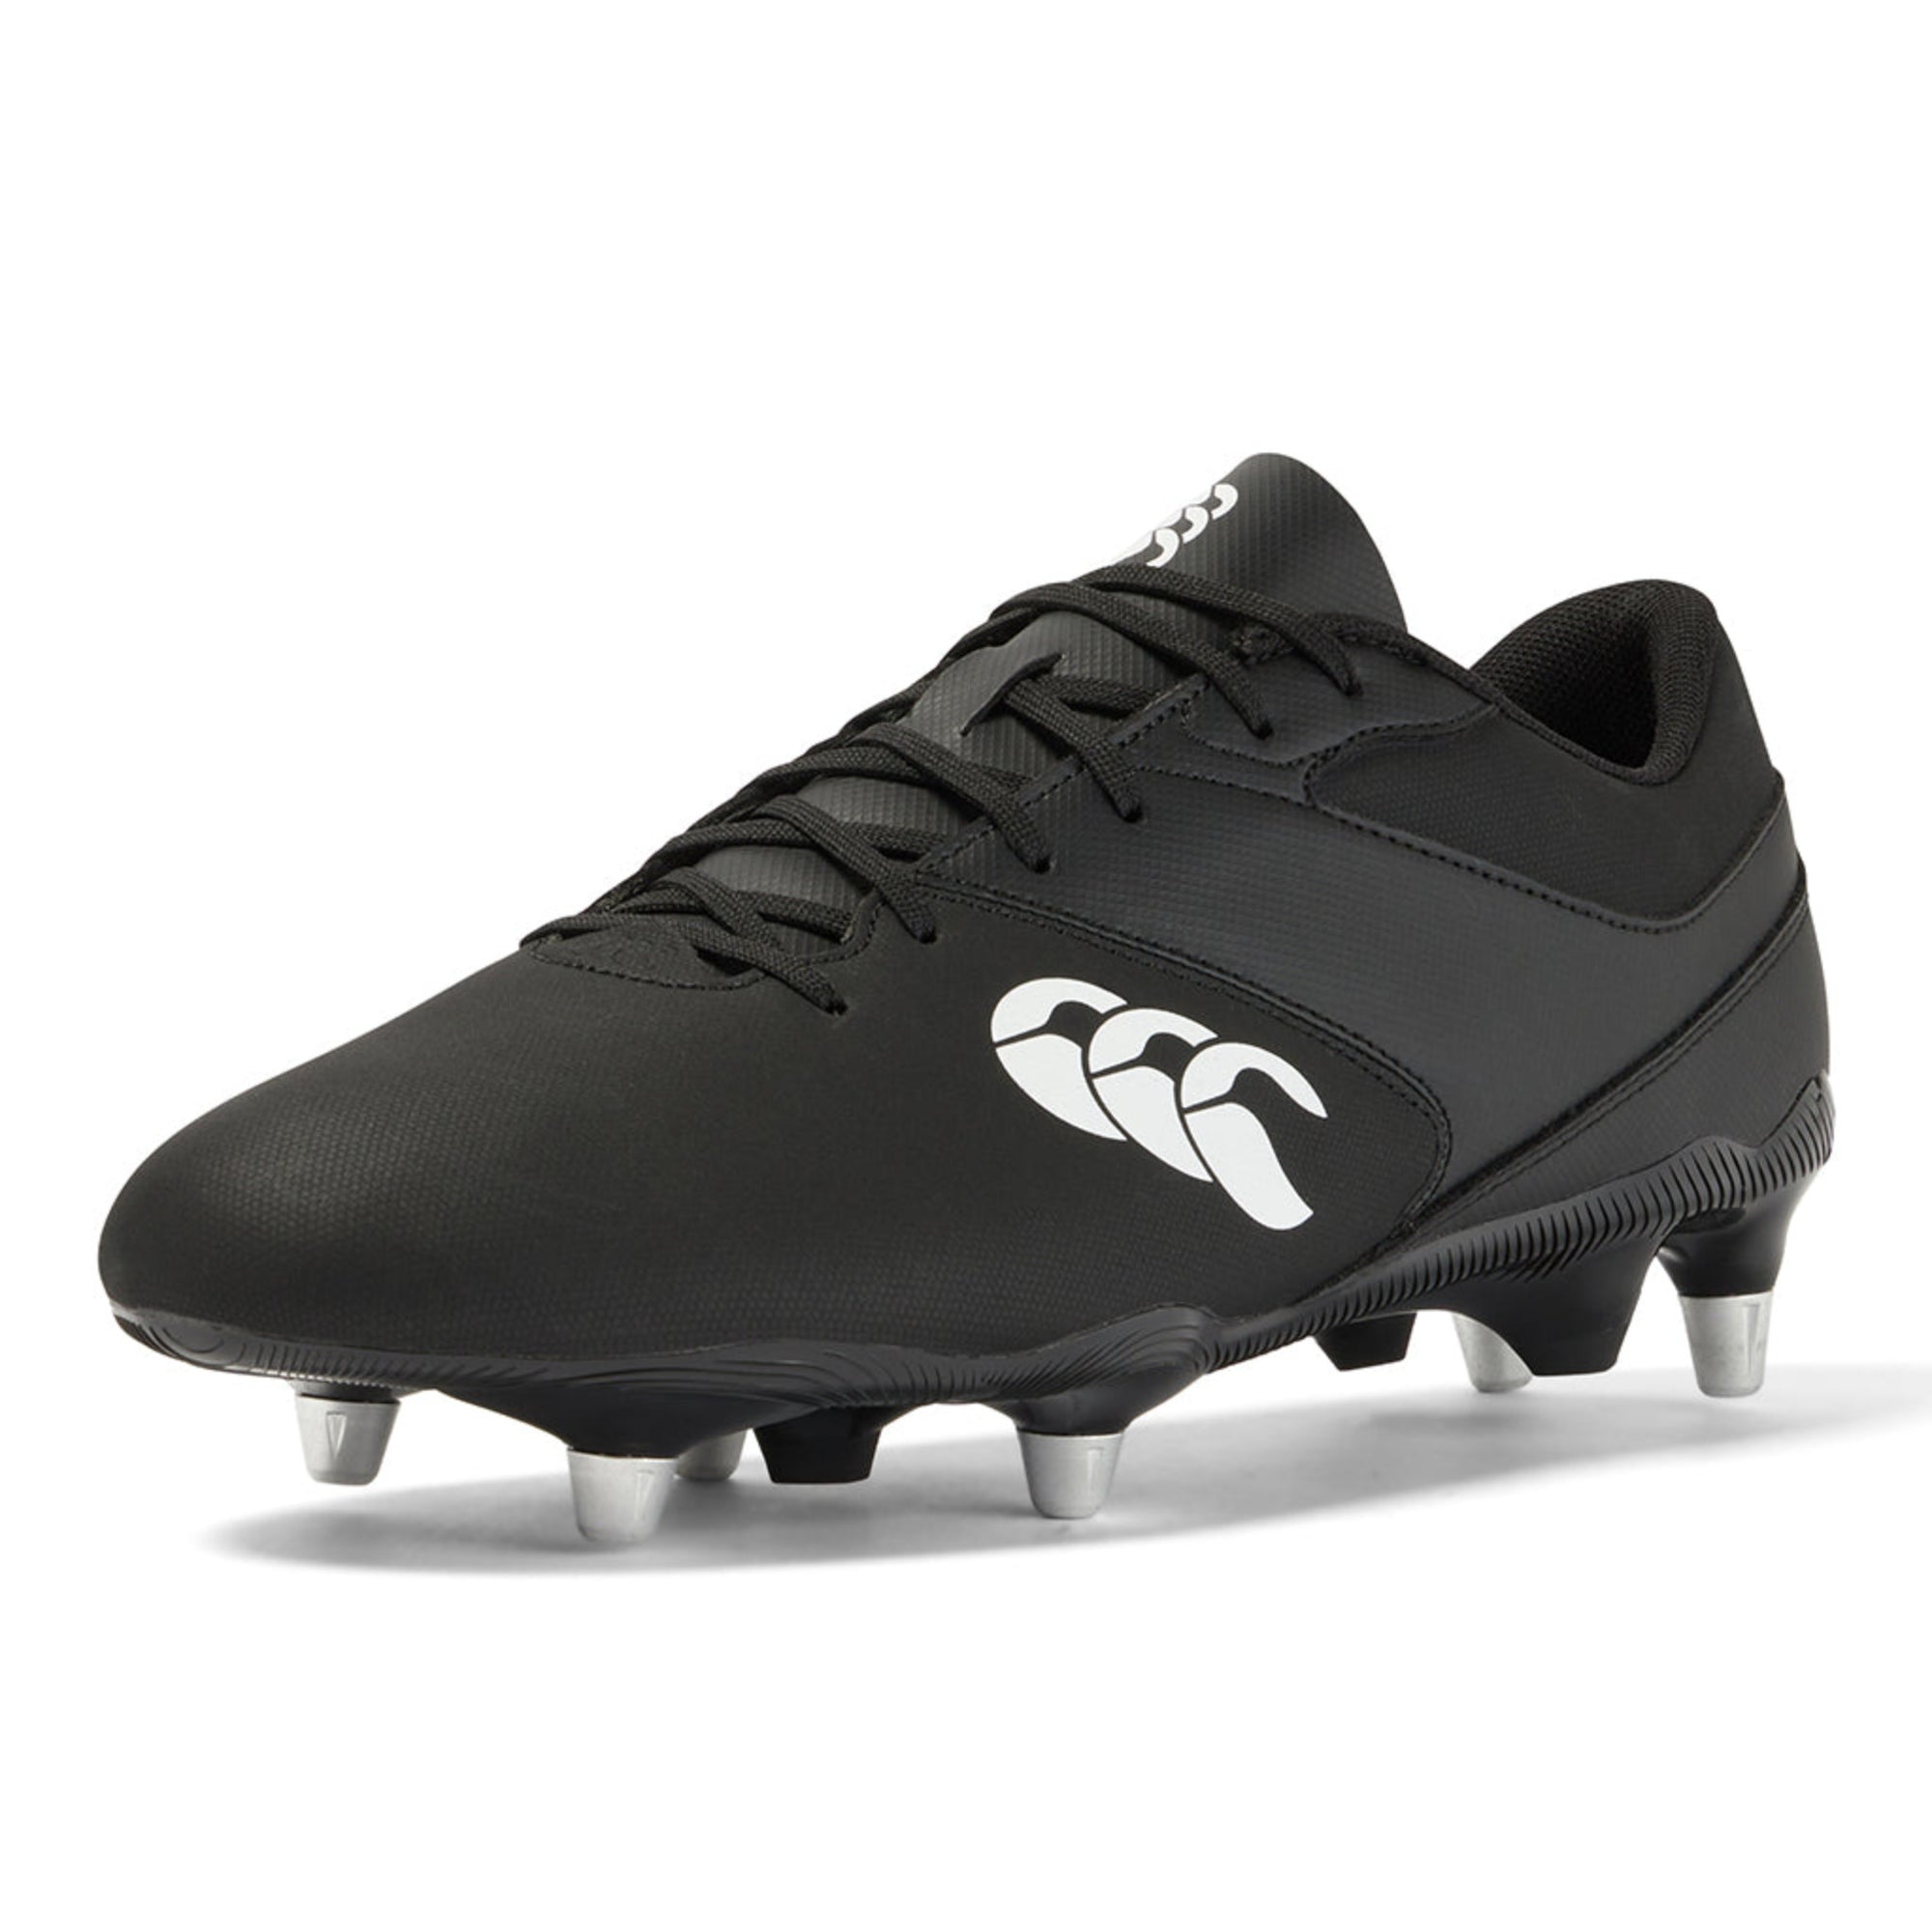 Canterbury Phoenix Raze SG Cleats a High-Performance Durable CCC Rugby Boot Black/White Available in Unisex Sizing 6-16